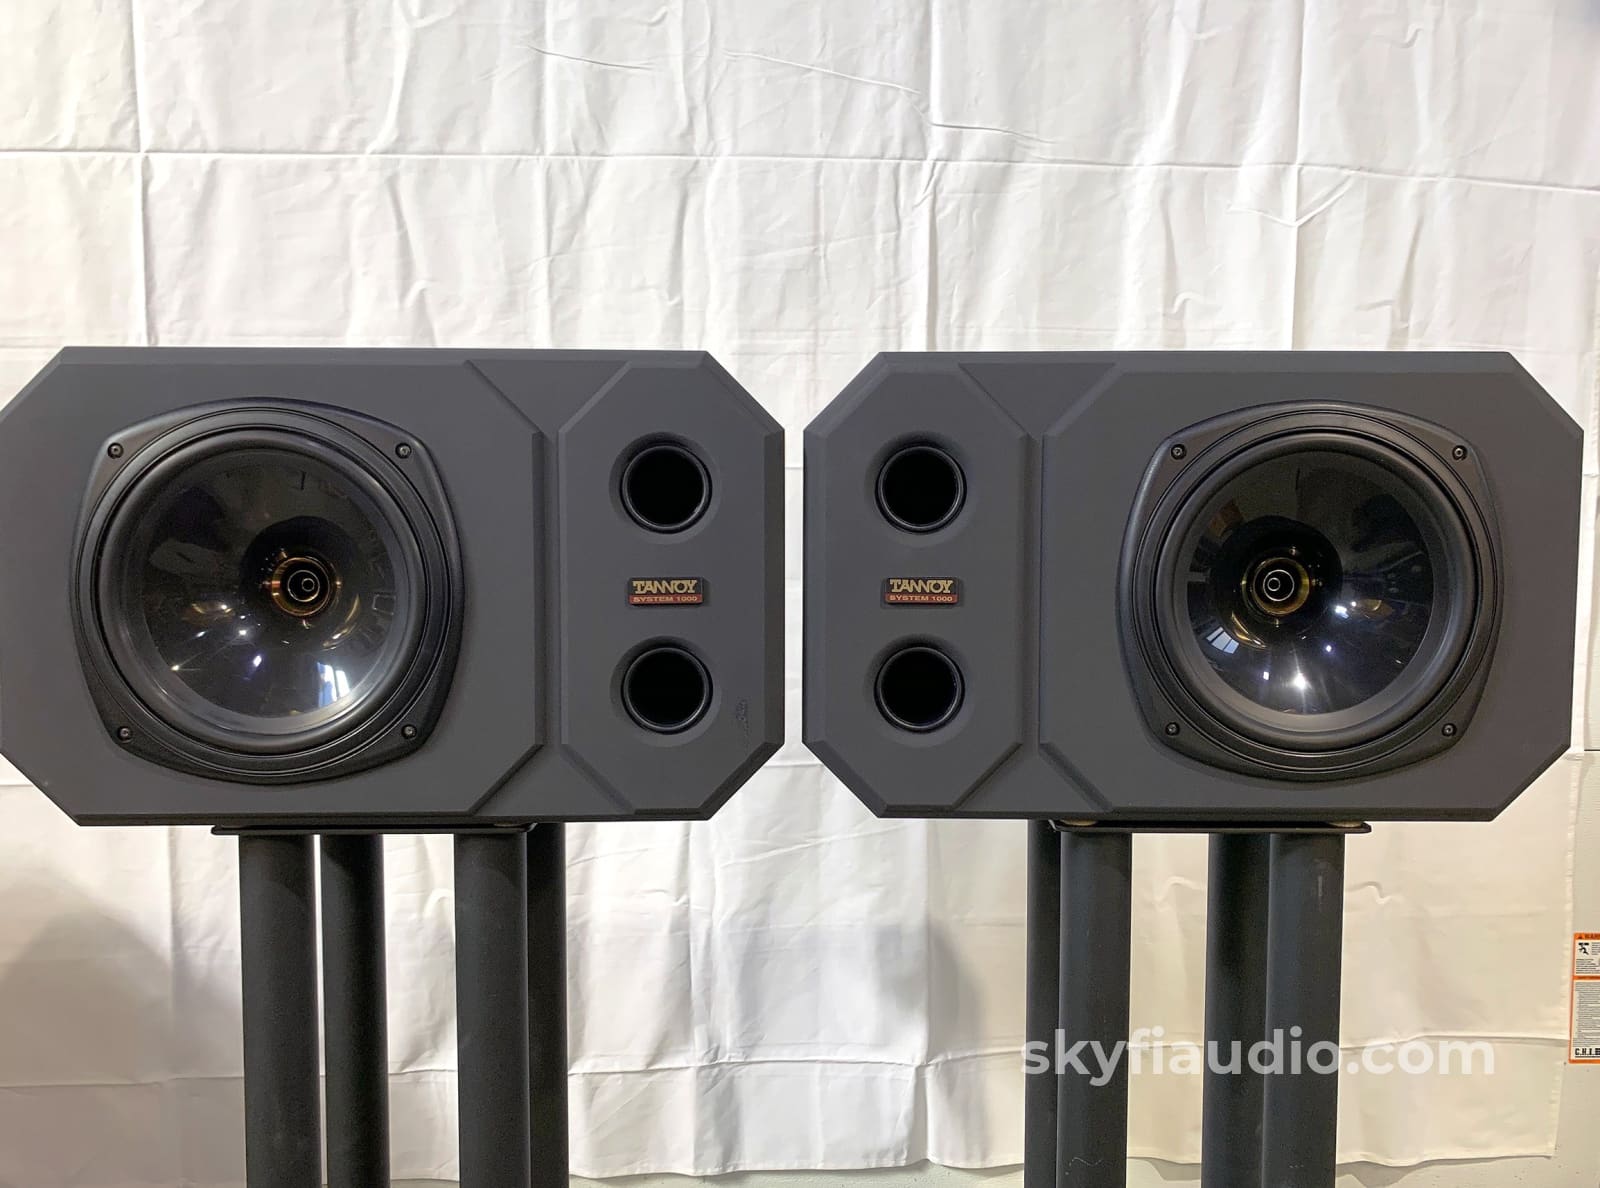 Tannoy System 1000 Professional Studio Monitors With 10 Drivers Speakers